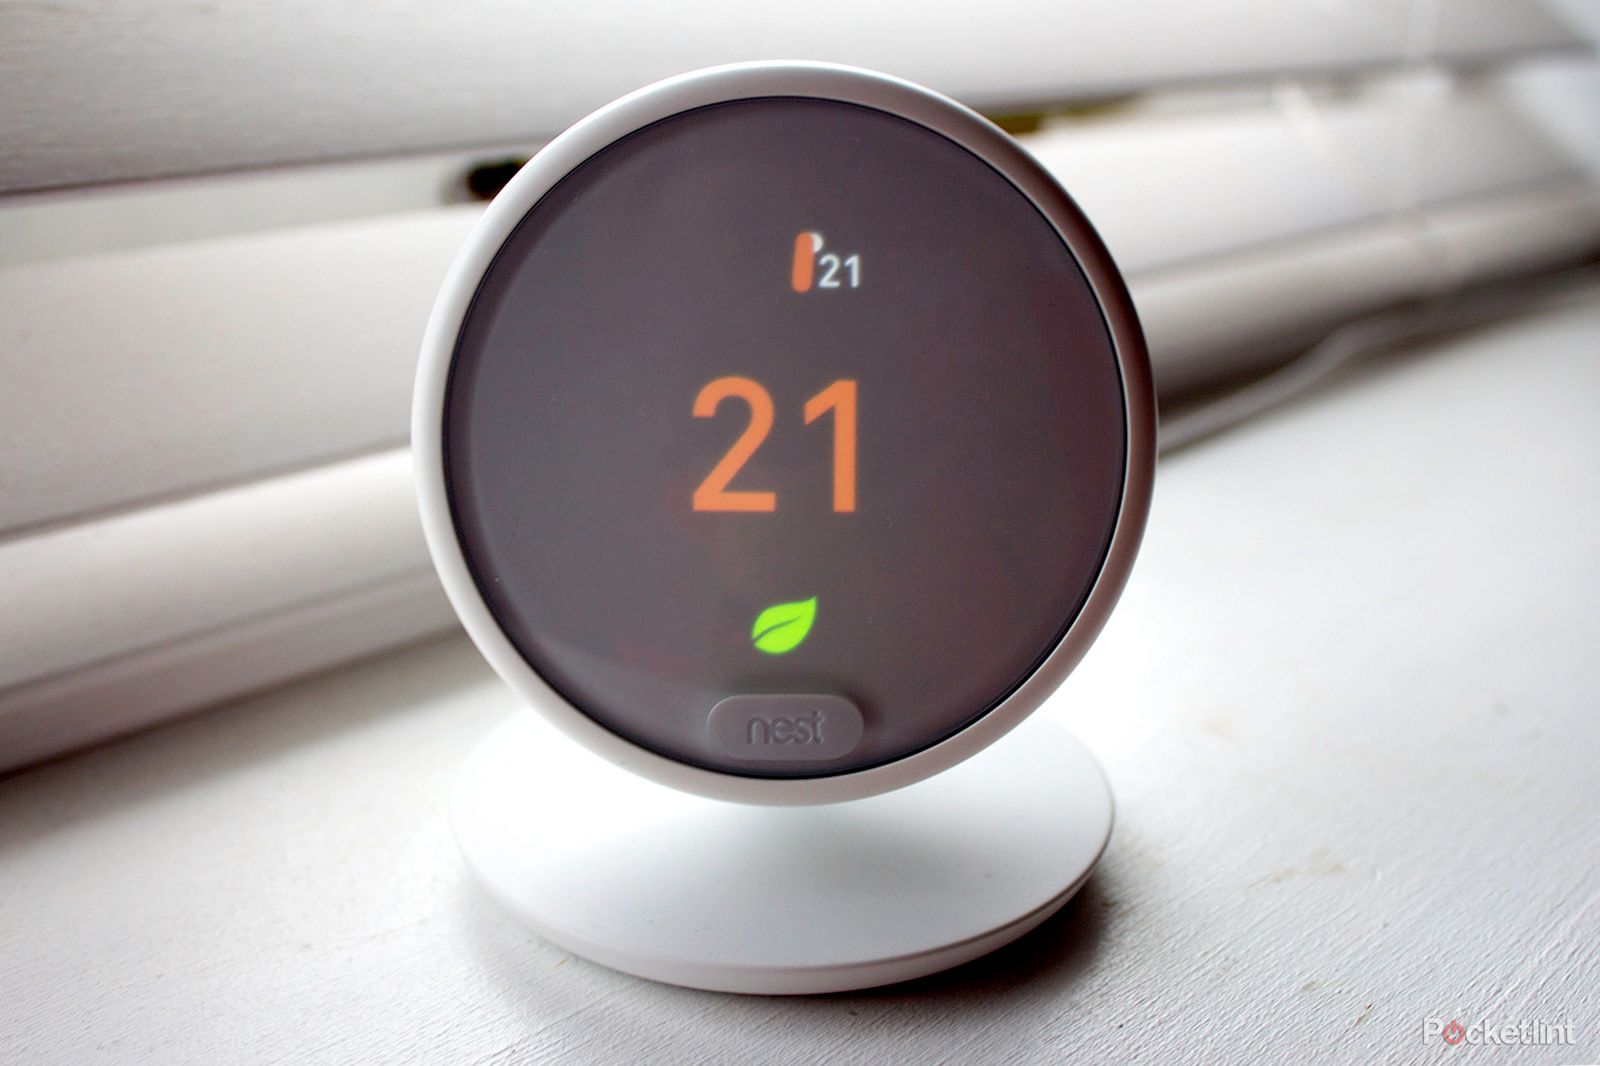 Thermostat E review - Pocket-lint